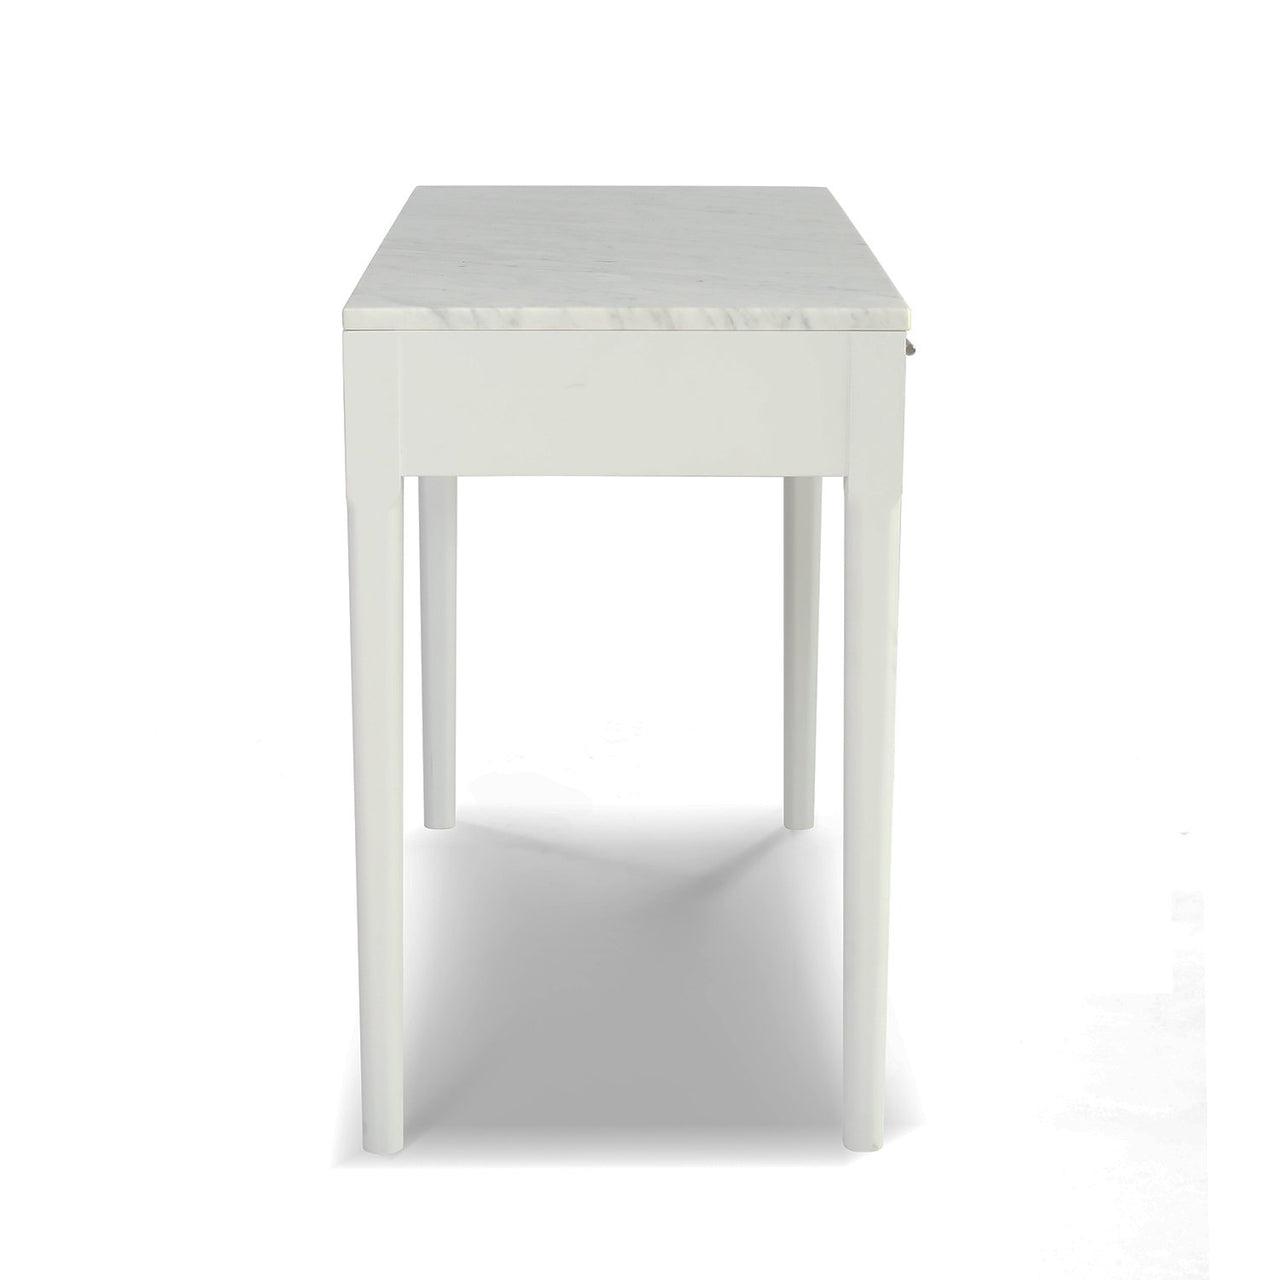 Meno 36" Rectangular Italian Carrara White Marble Console Table with Legs Console Table The Bianco Collection White 